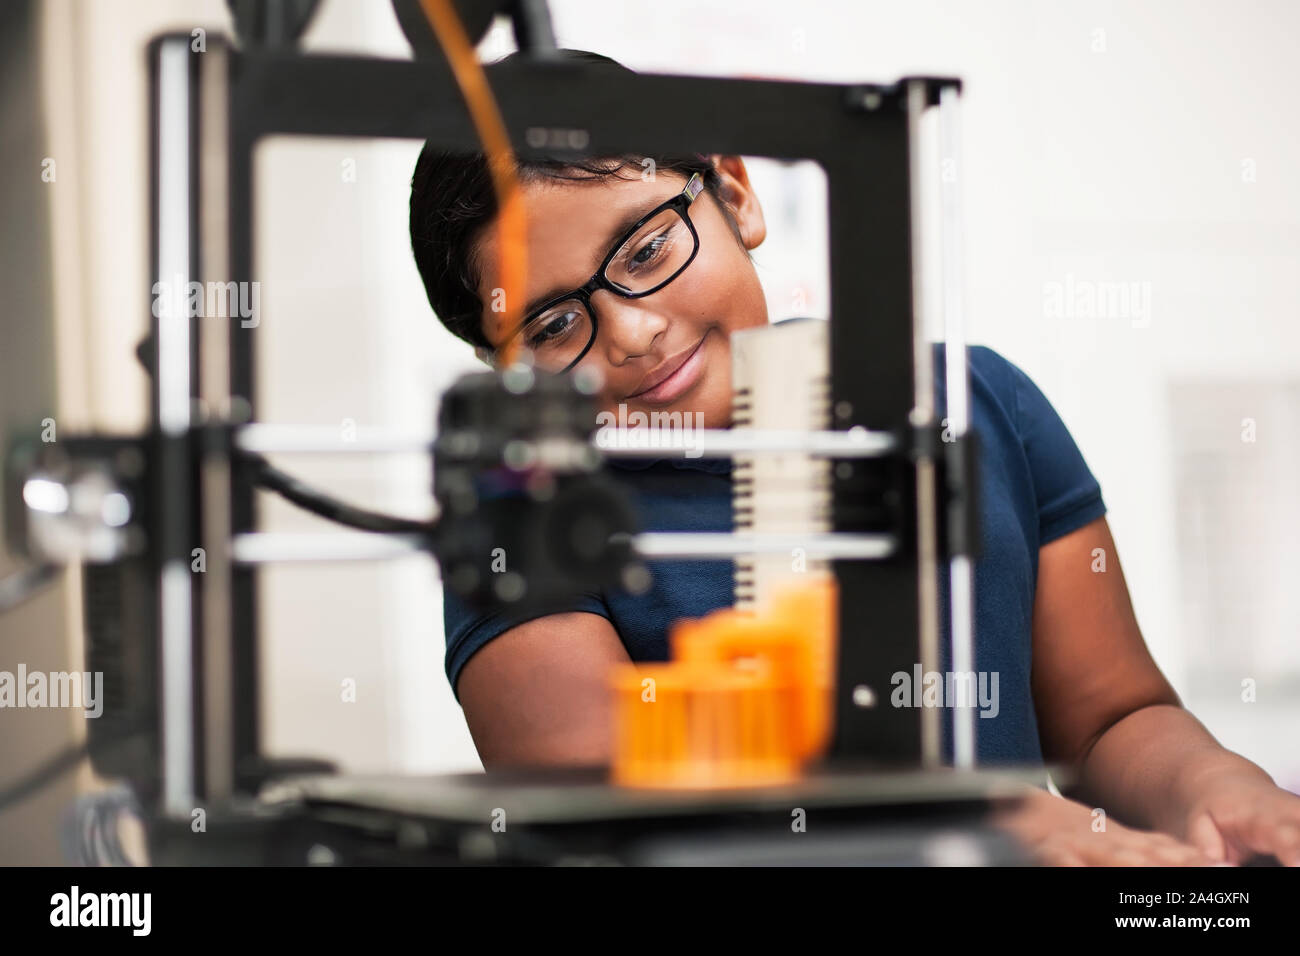 A smart little girl admiring her 3D printed model from behind the 3D printer. Stock Photo